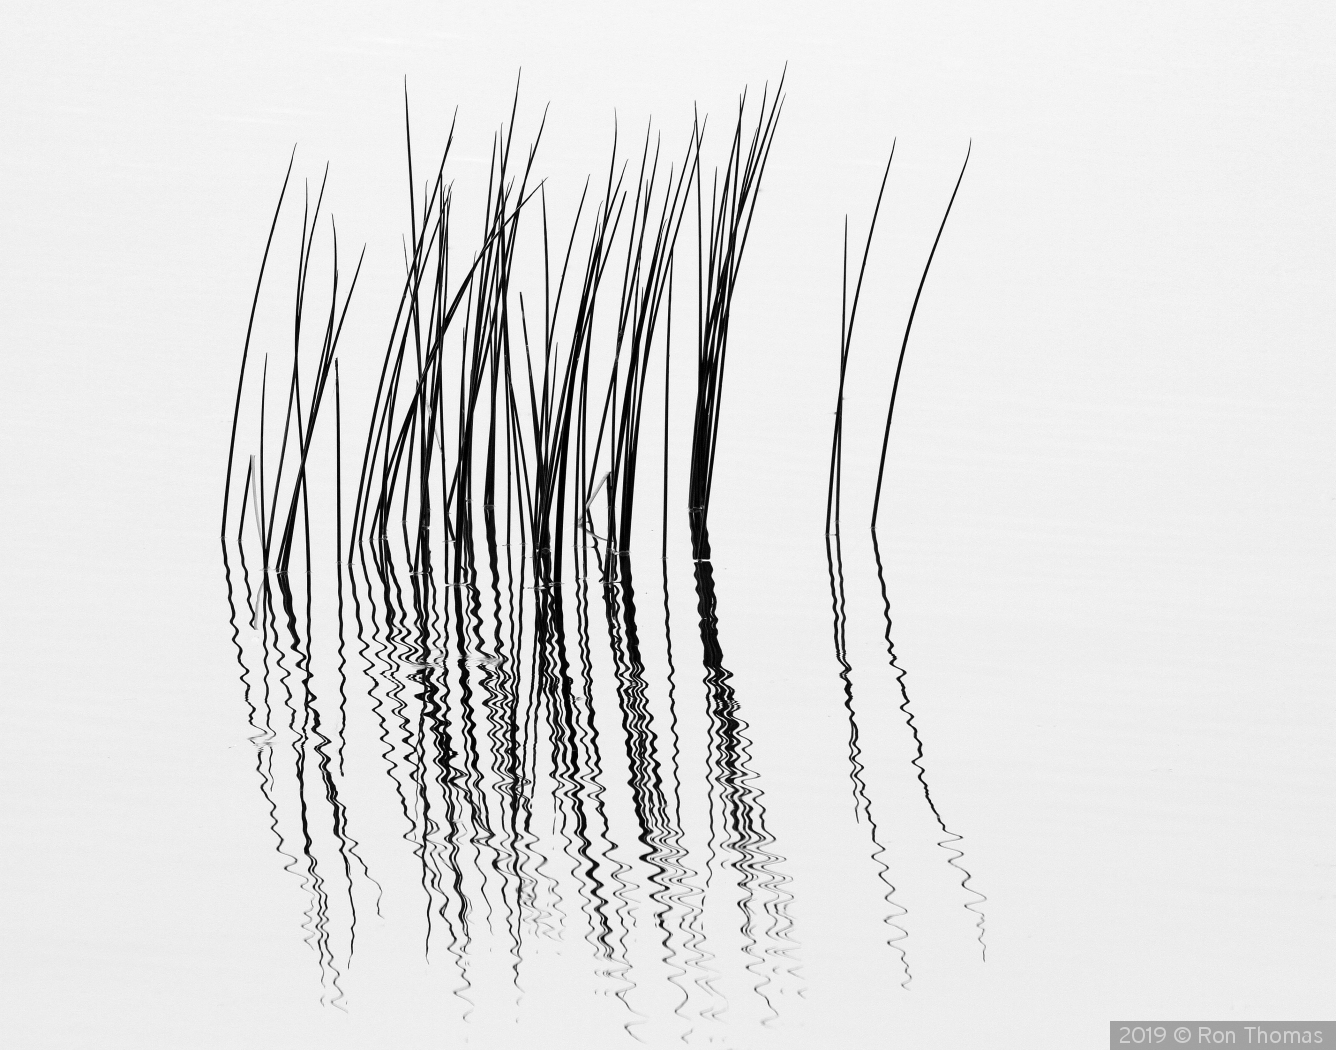 Reeds on a pond by Ron Thomas